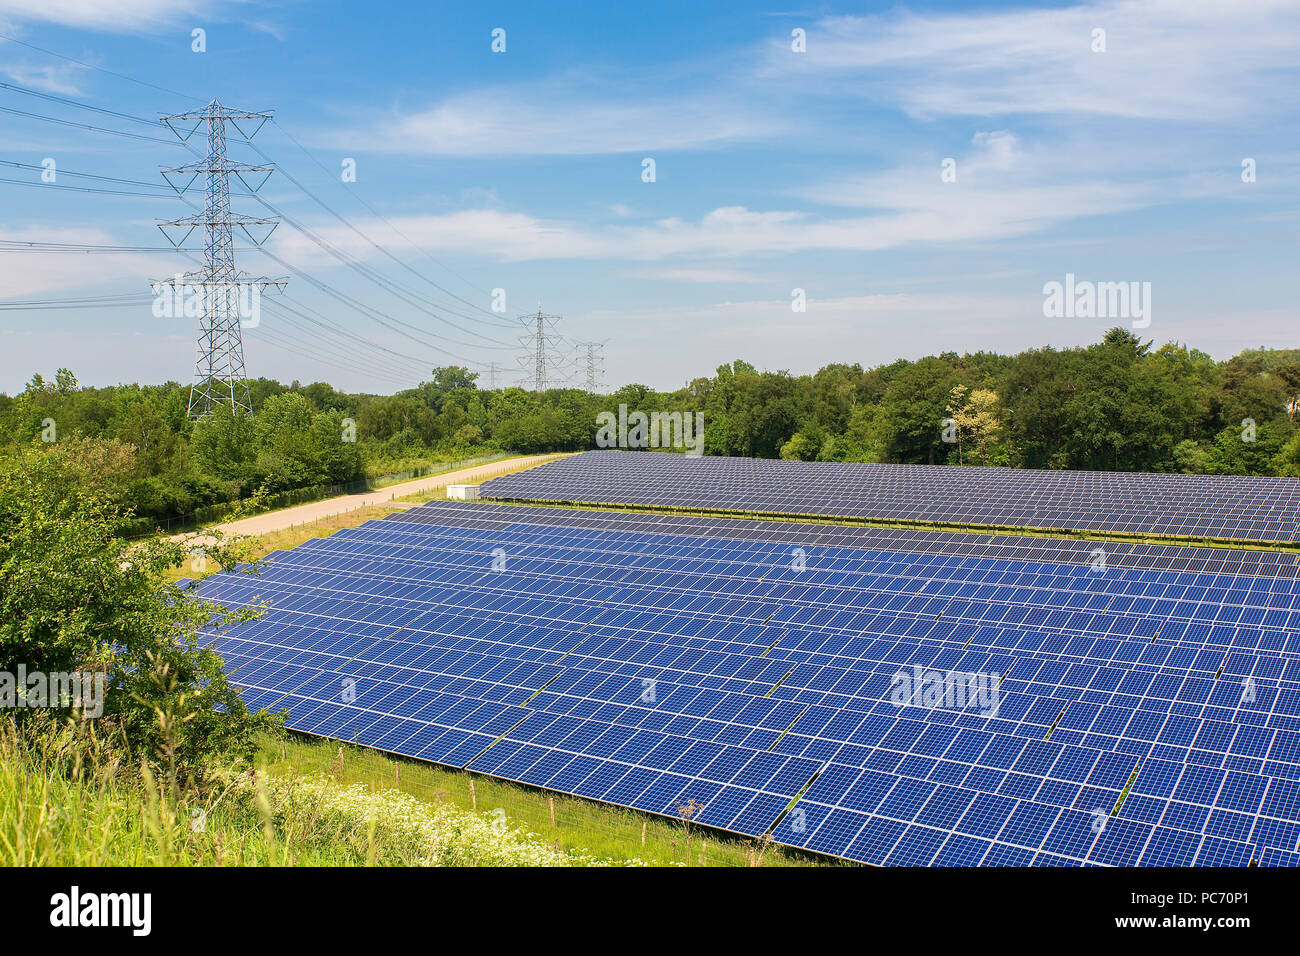 Big field with solar collectors in the netherlands Stock Photo